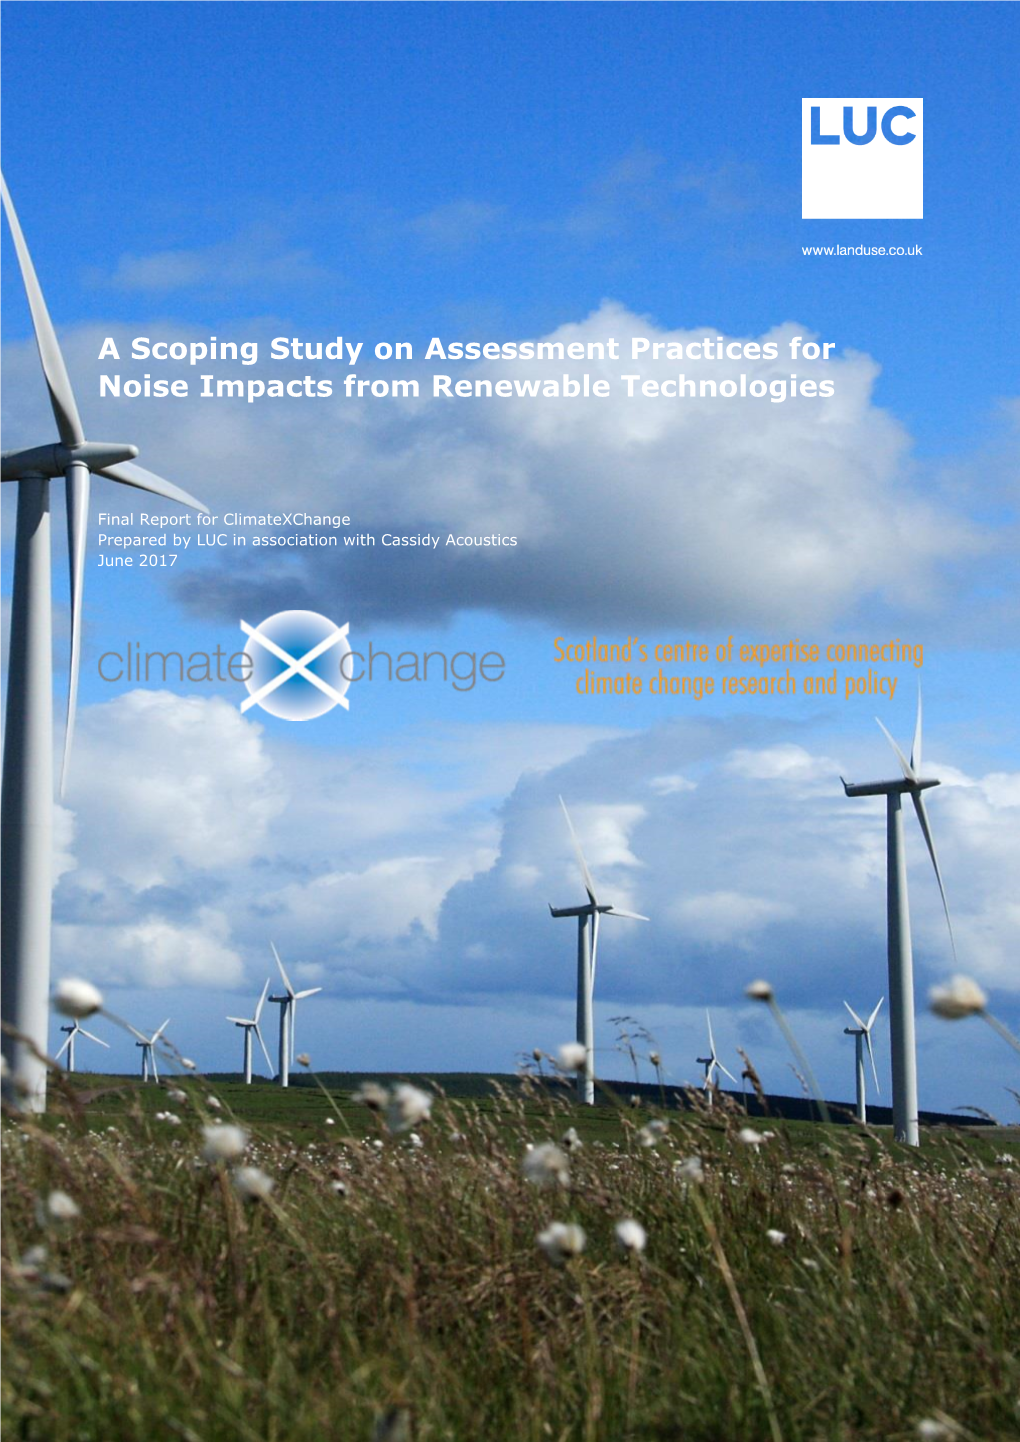 A Scoping Study on Assessment Practices for Noise Impacts from Renewable Technologies